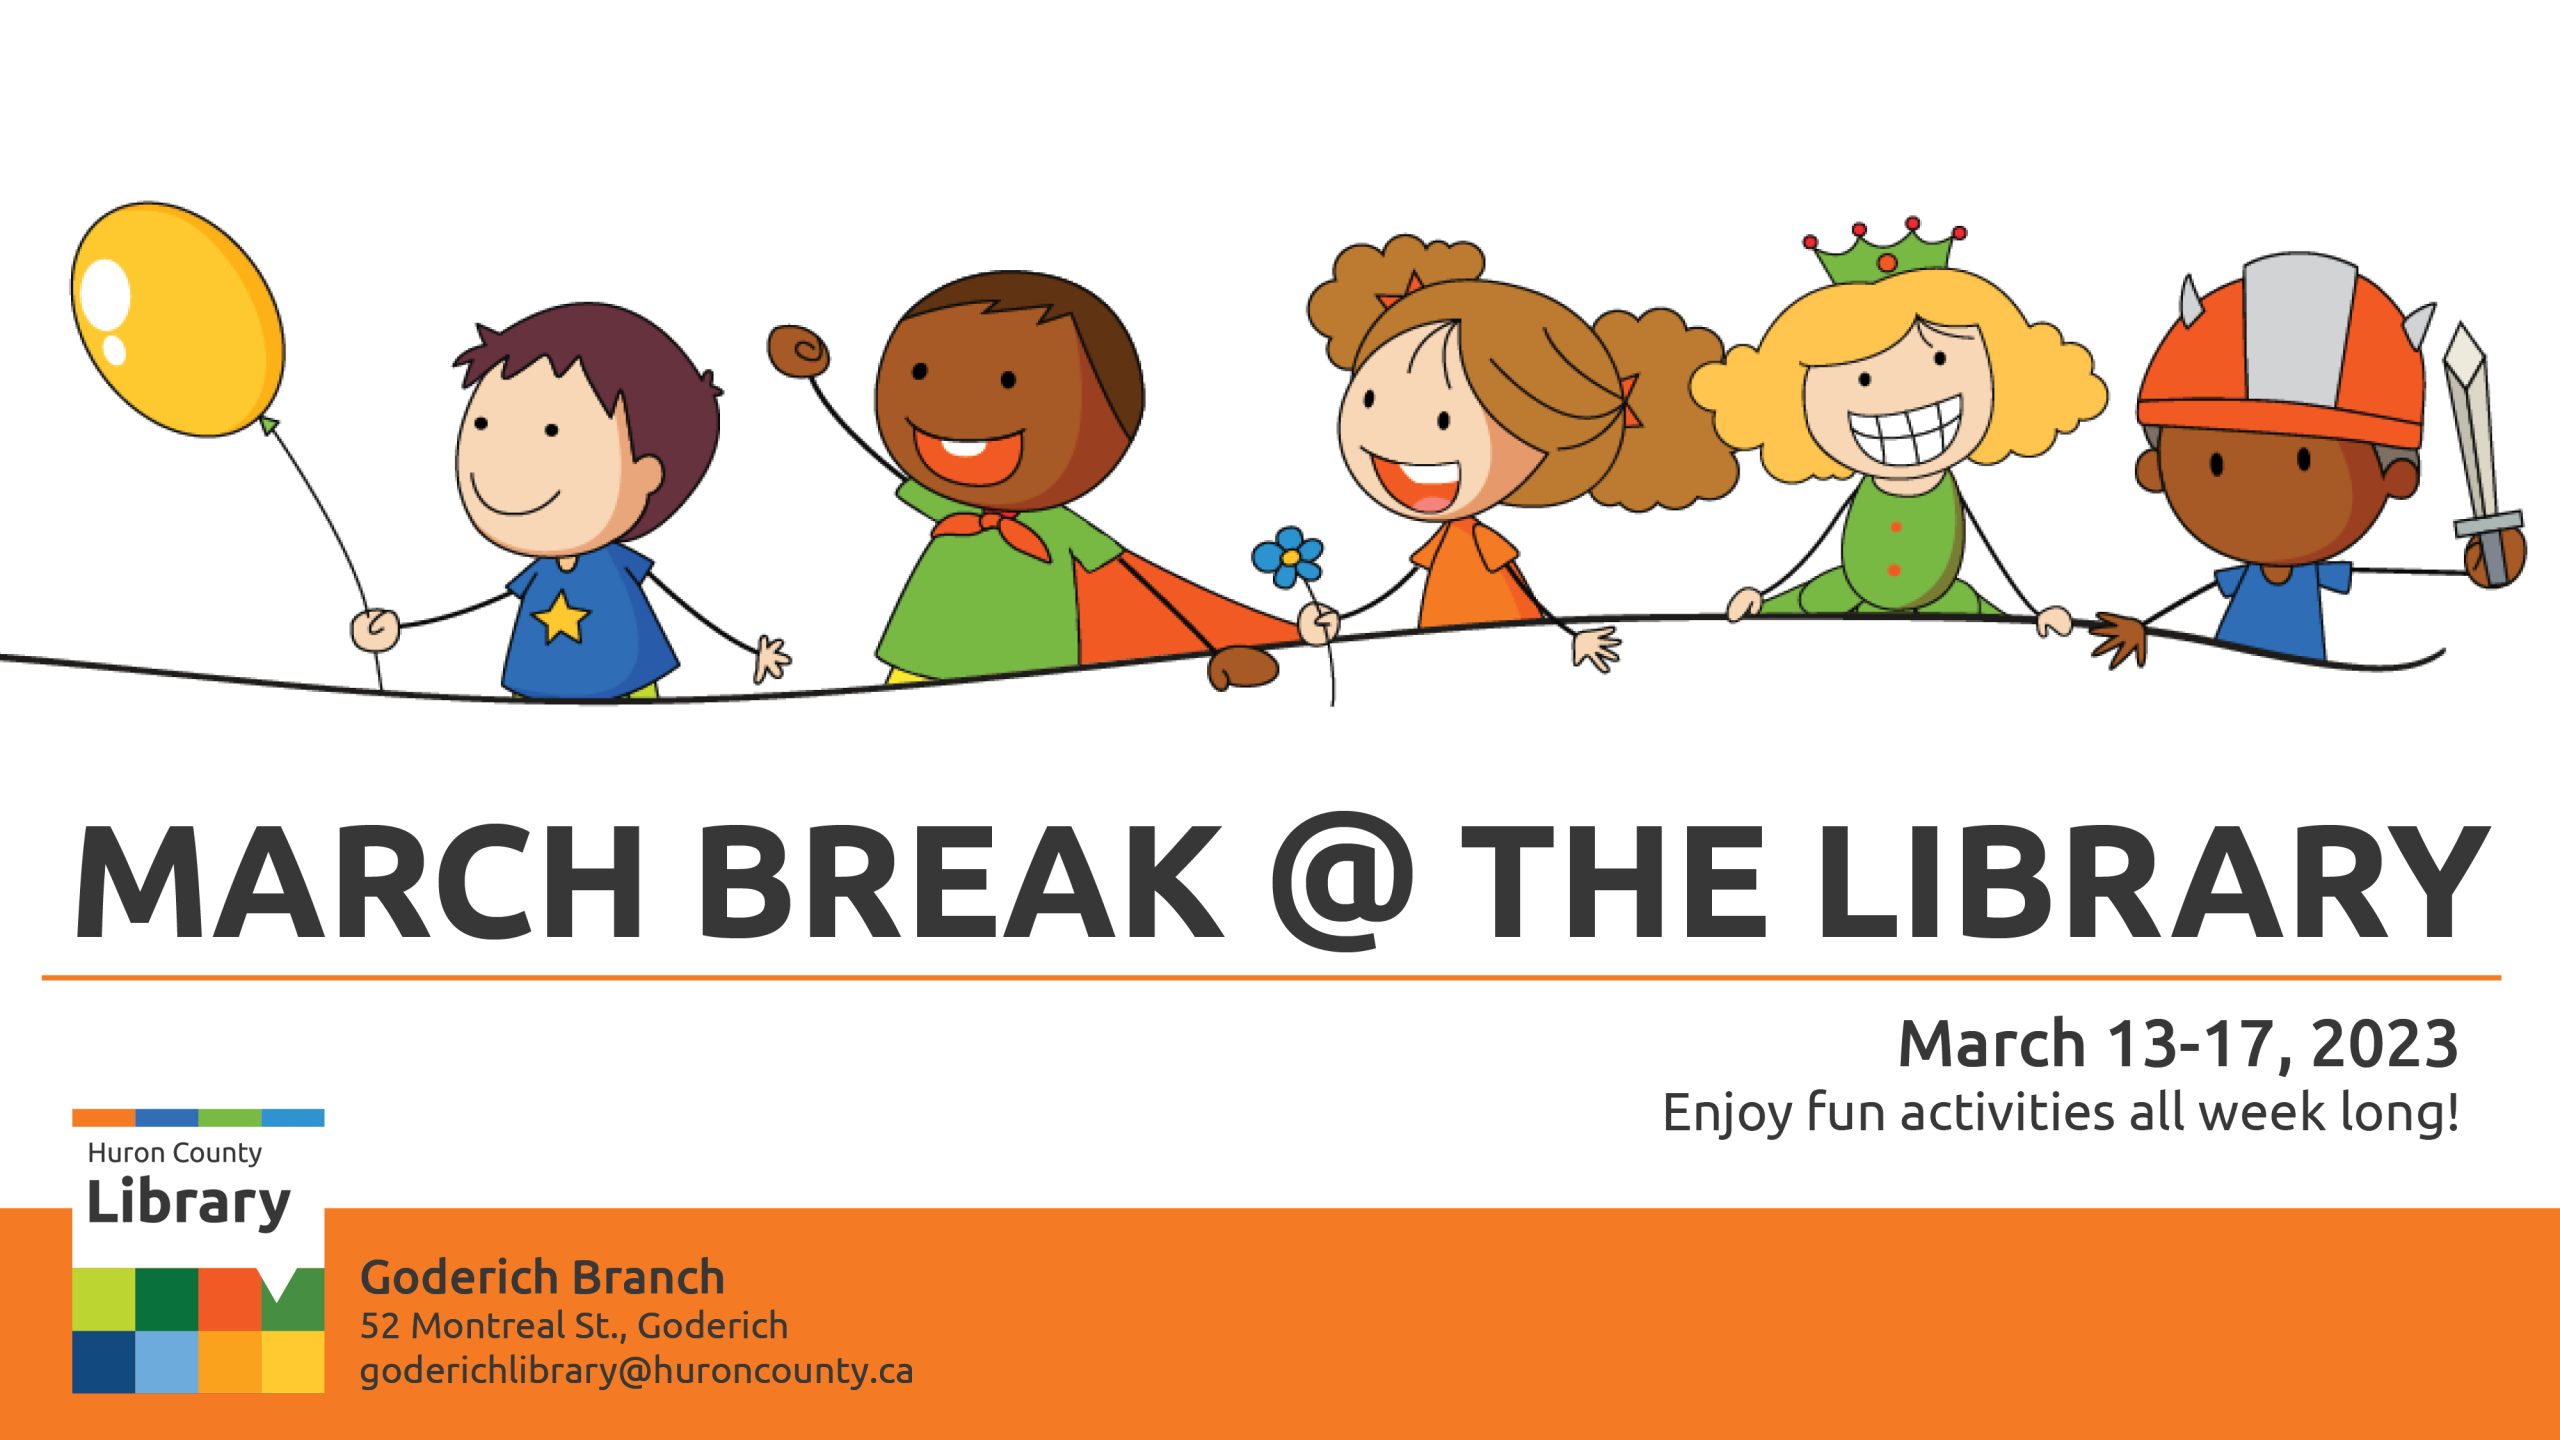 Illustration of 5 kids having fun with text promoting March Break at Goderich Branch